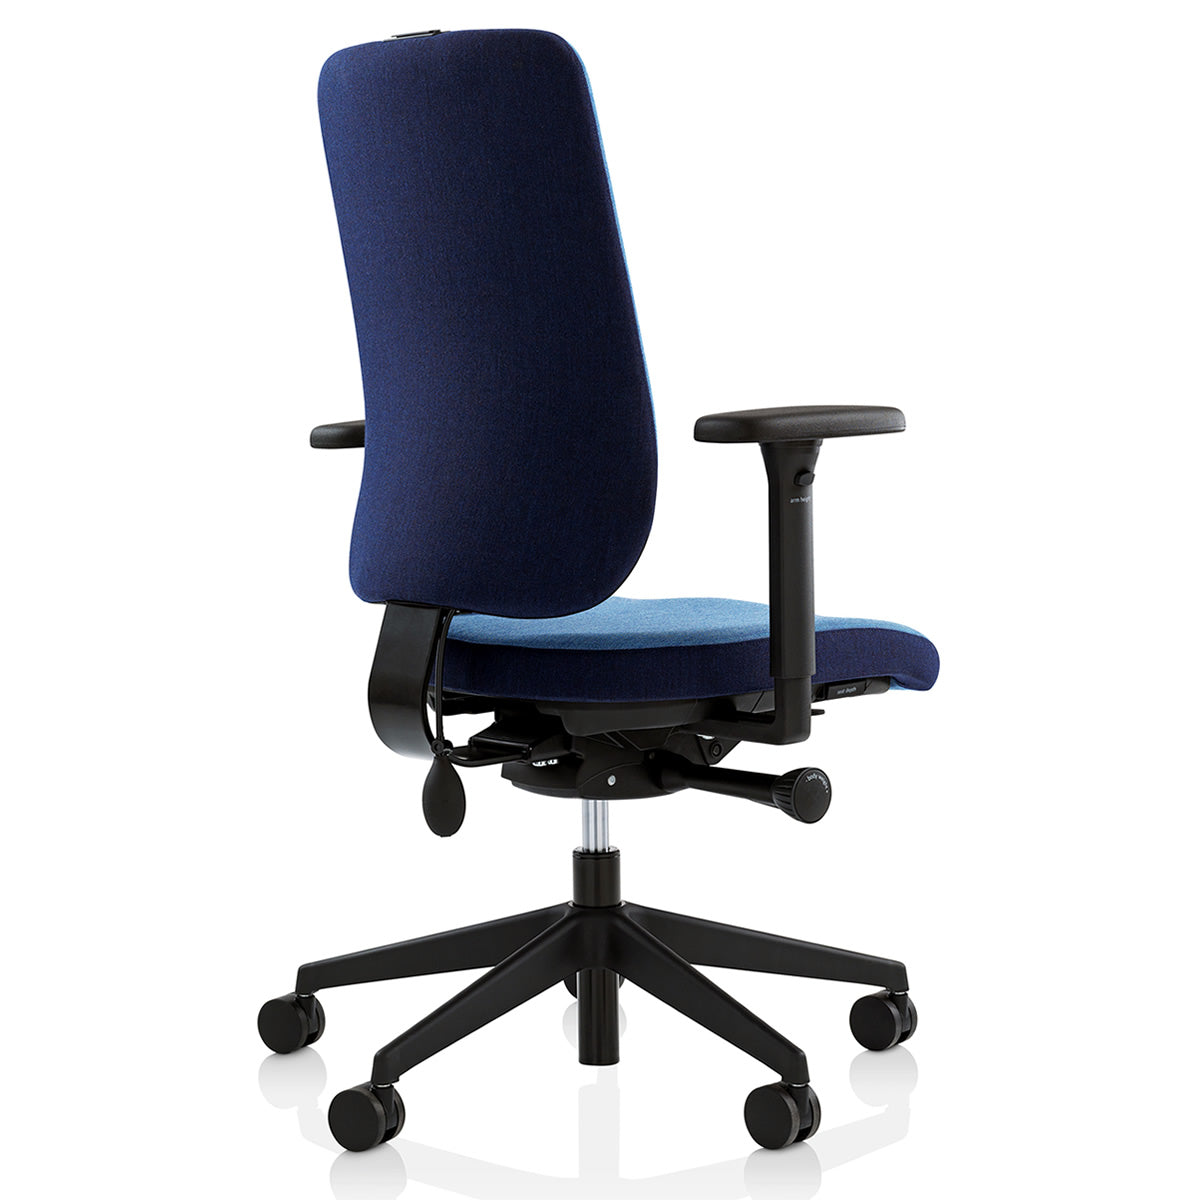 Being Us Adjustable Computer Chair